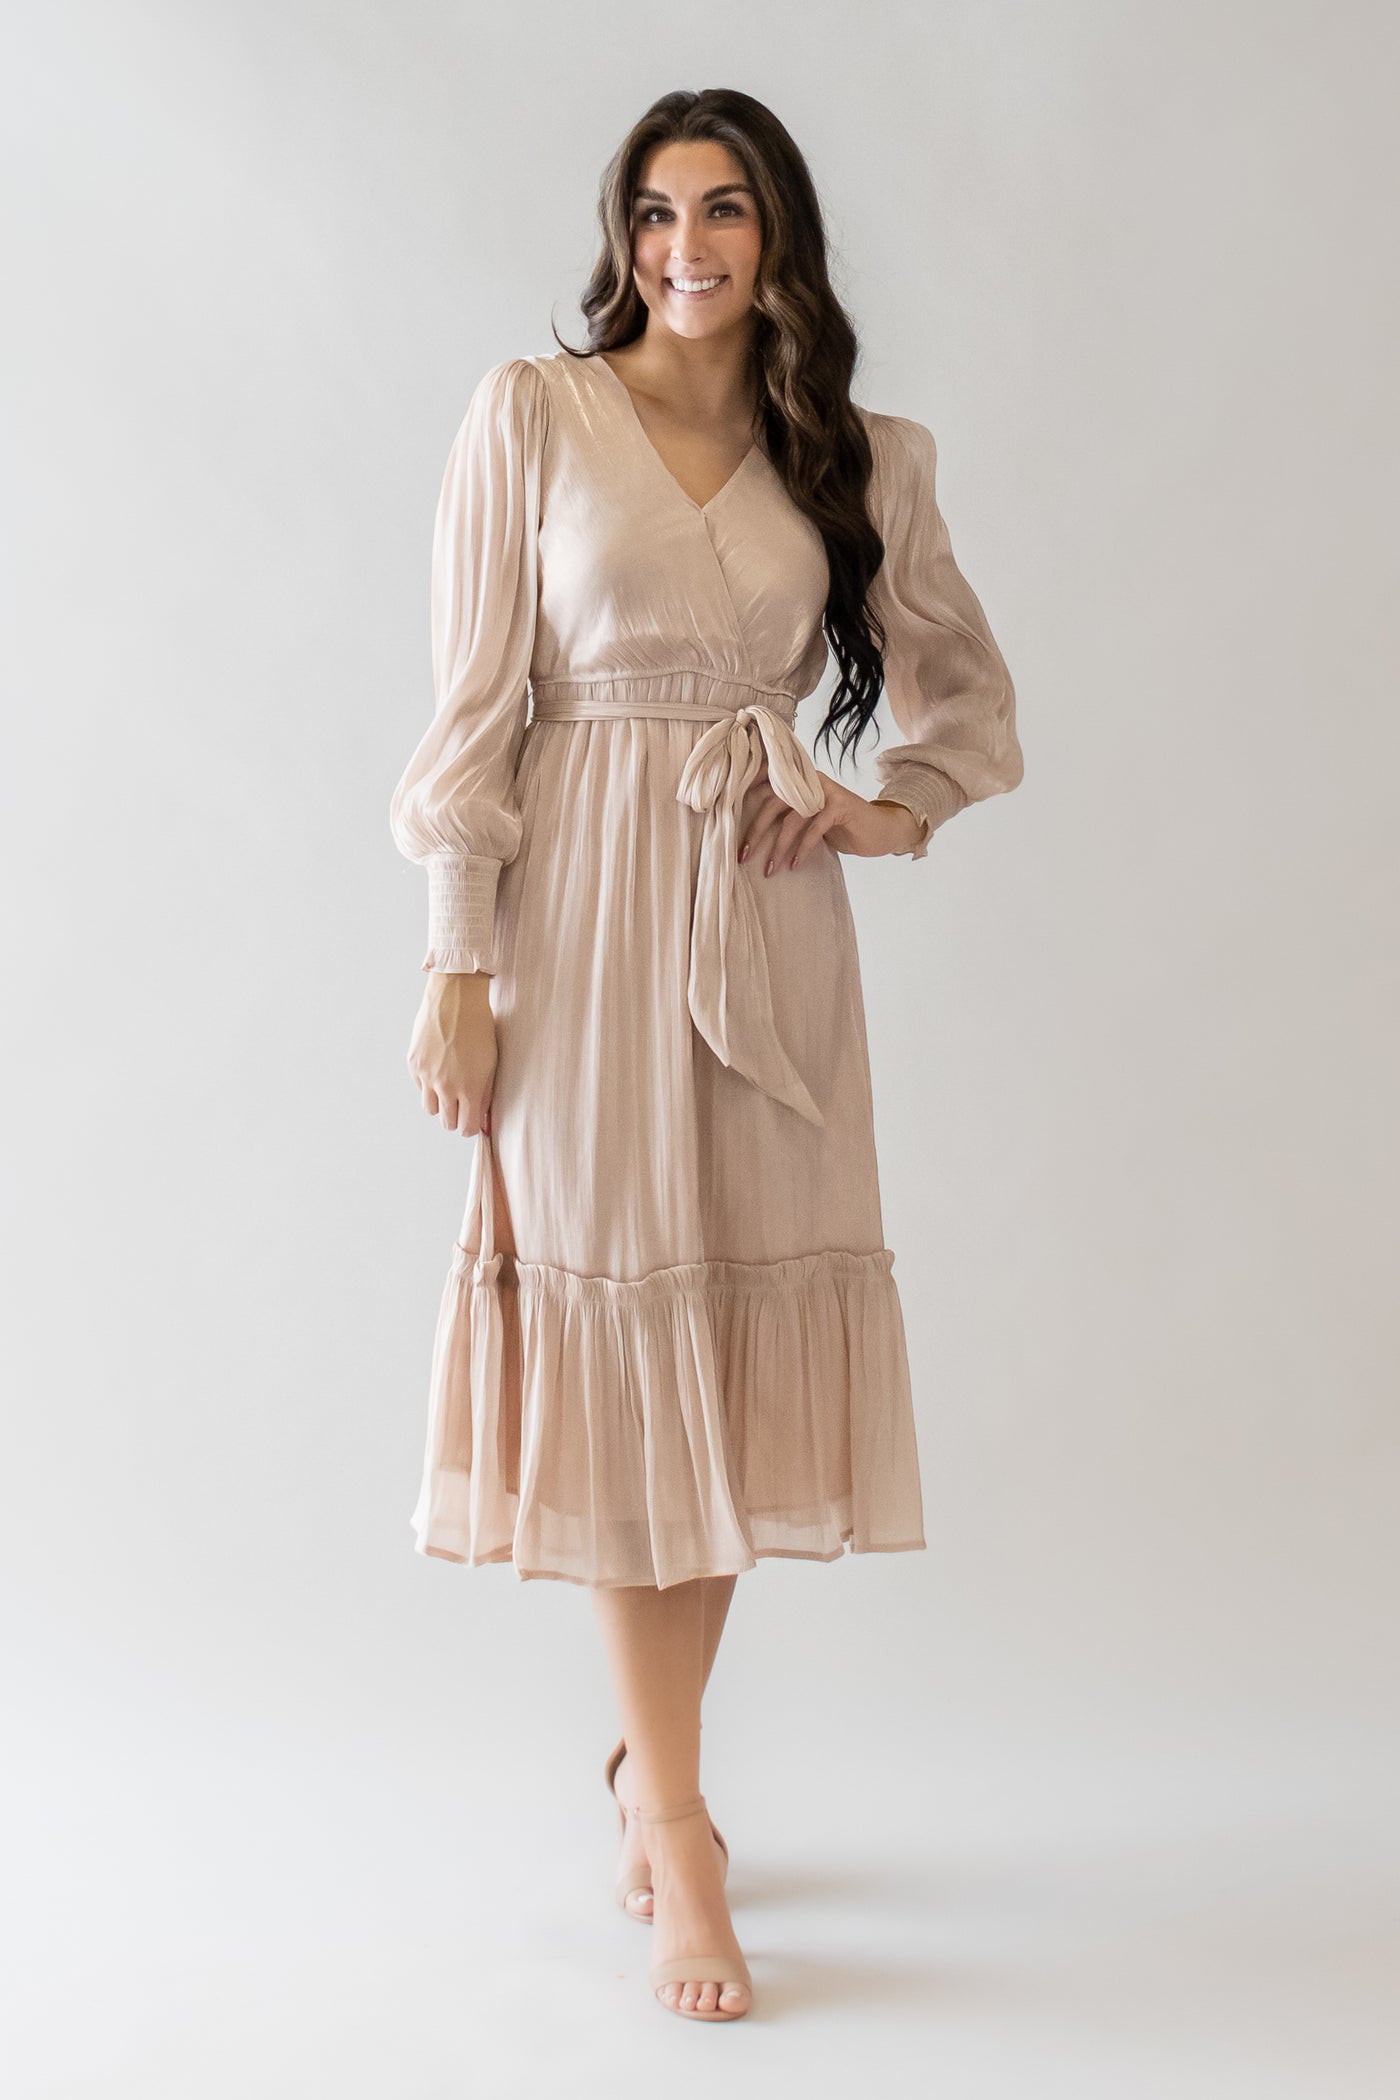 This is a modest dress with a tie in the front and midi length skirt and long sleeves.